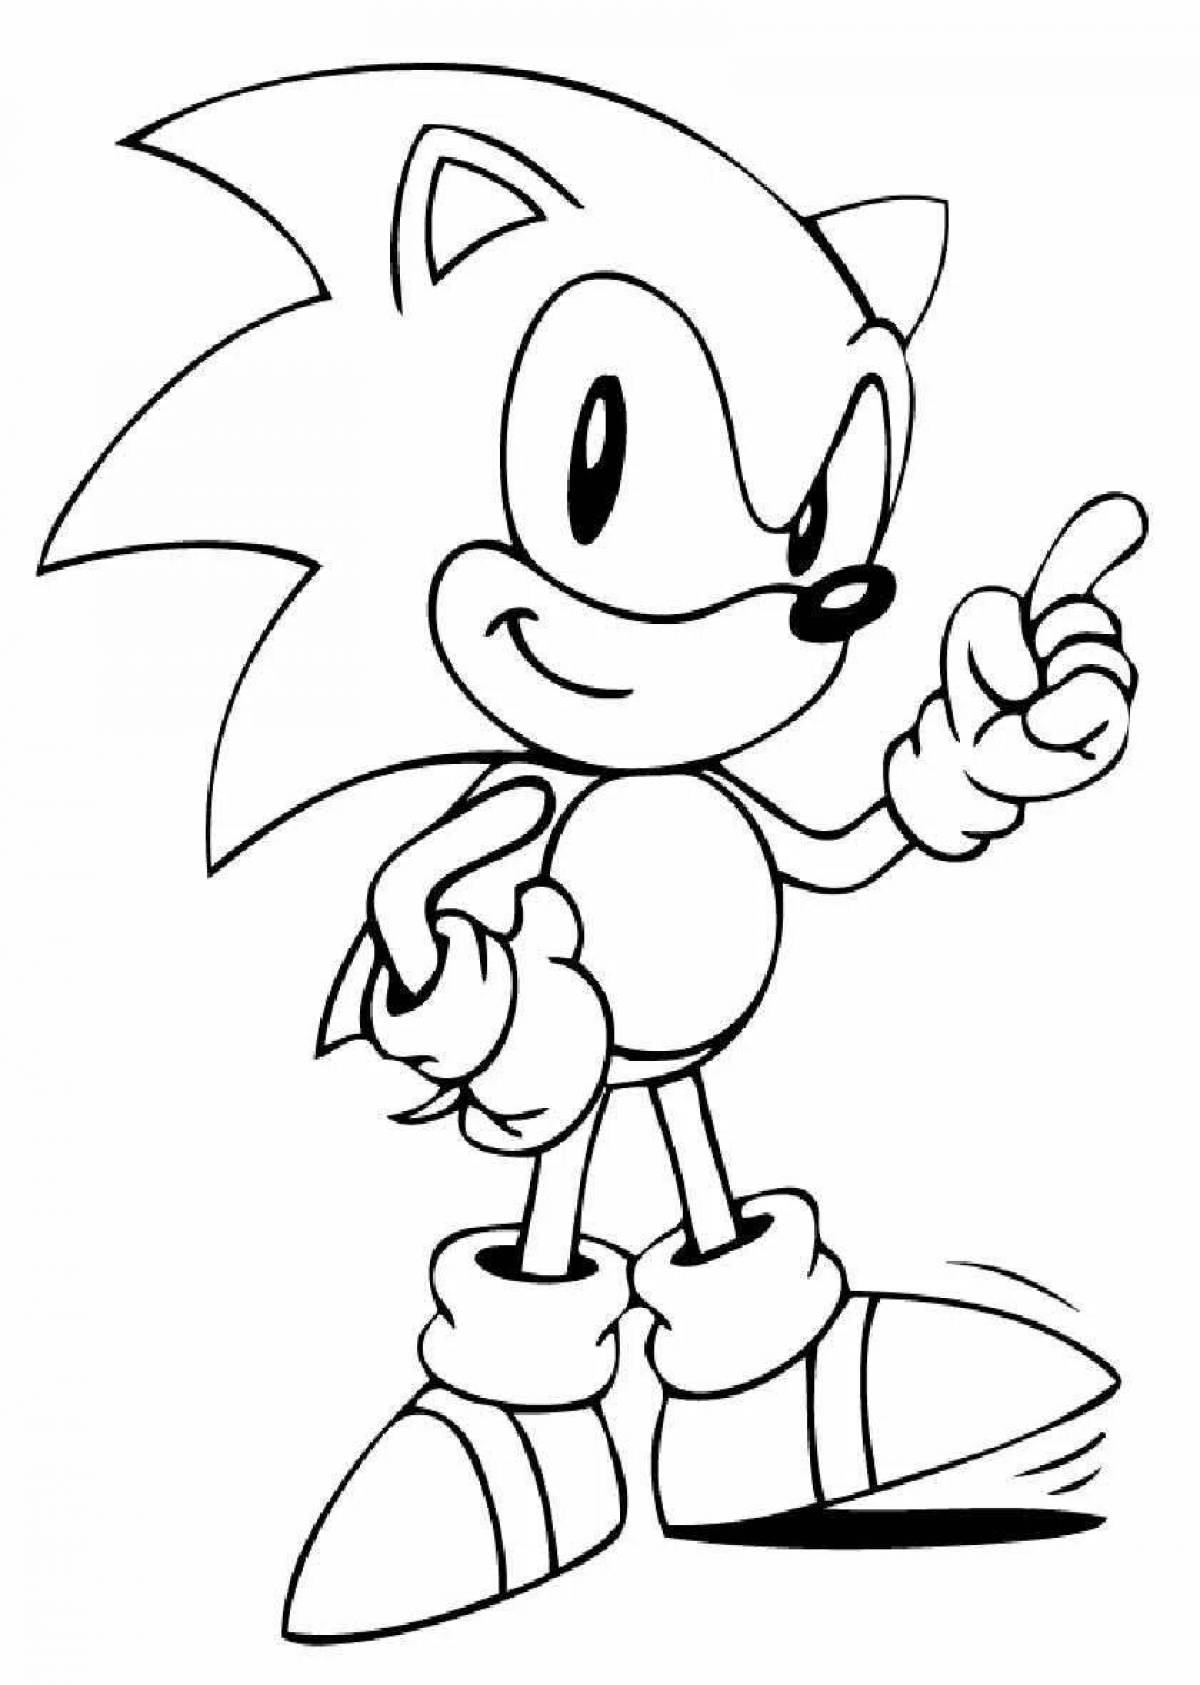 Sonic shredder awesome coloring book